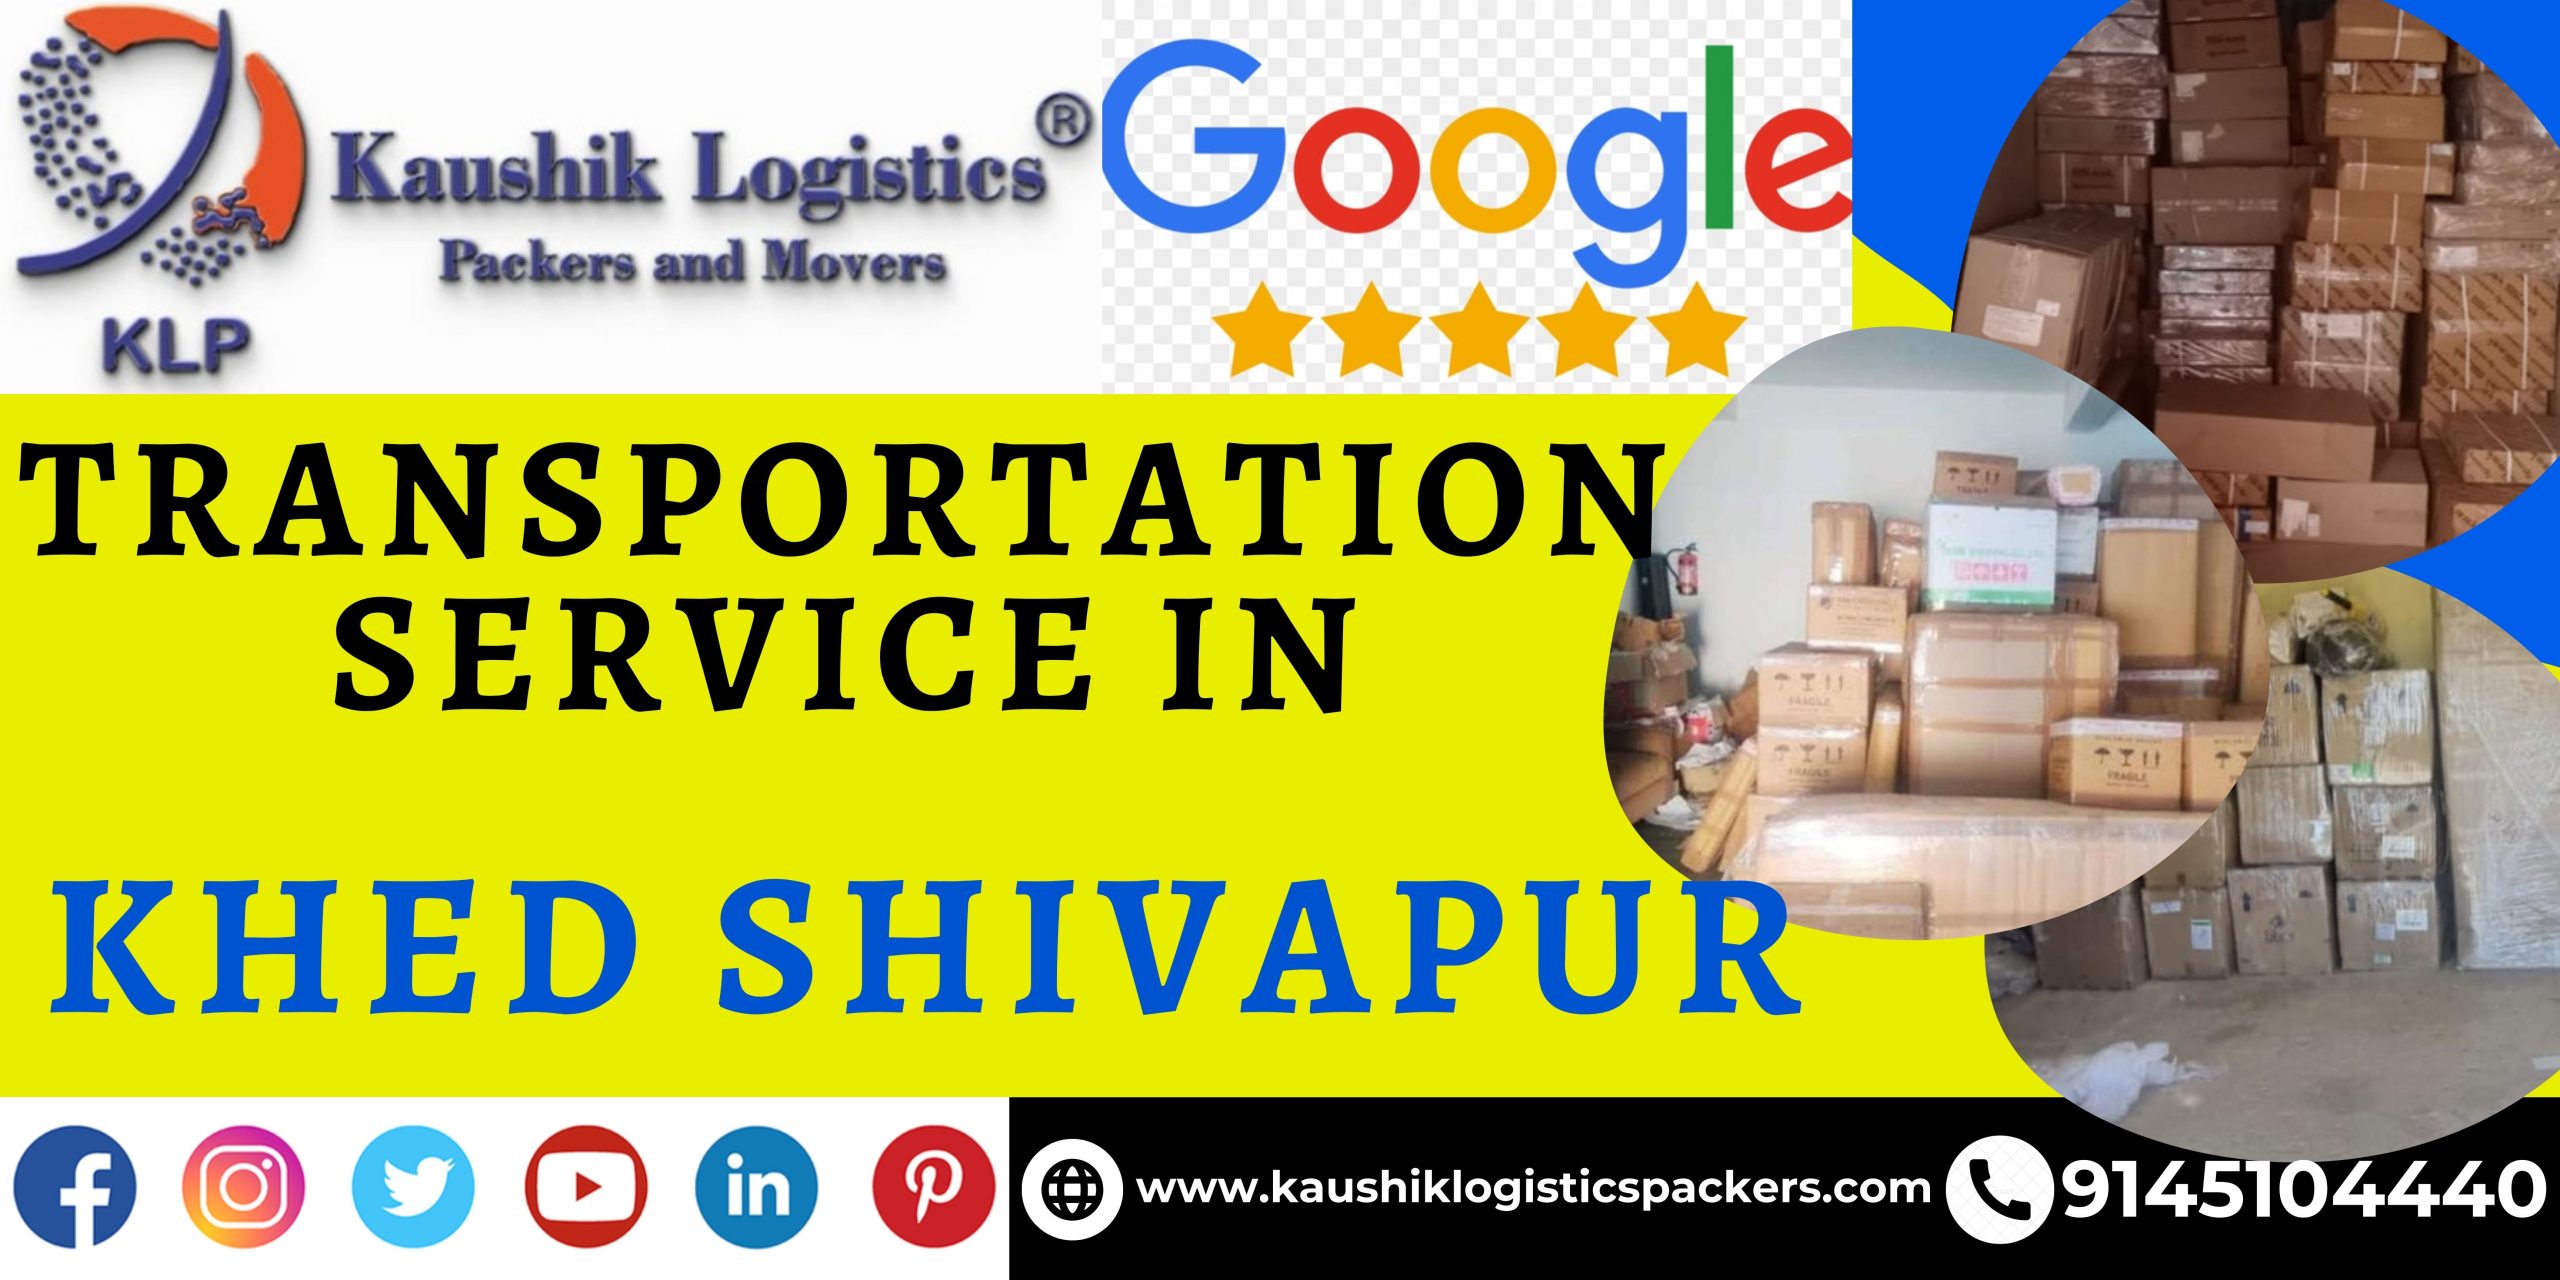 Packers and Movers In Khed Shivapur